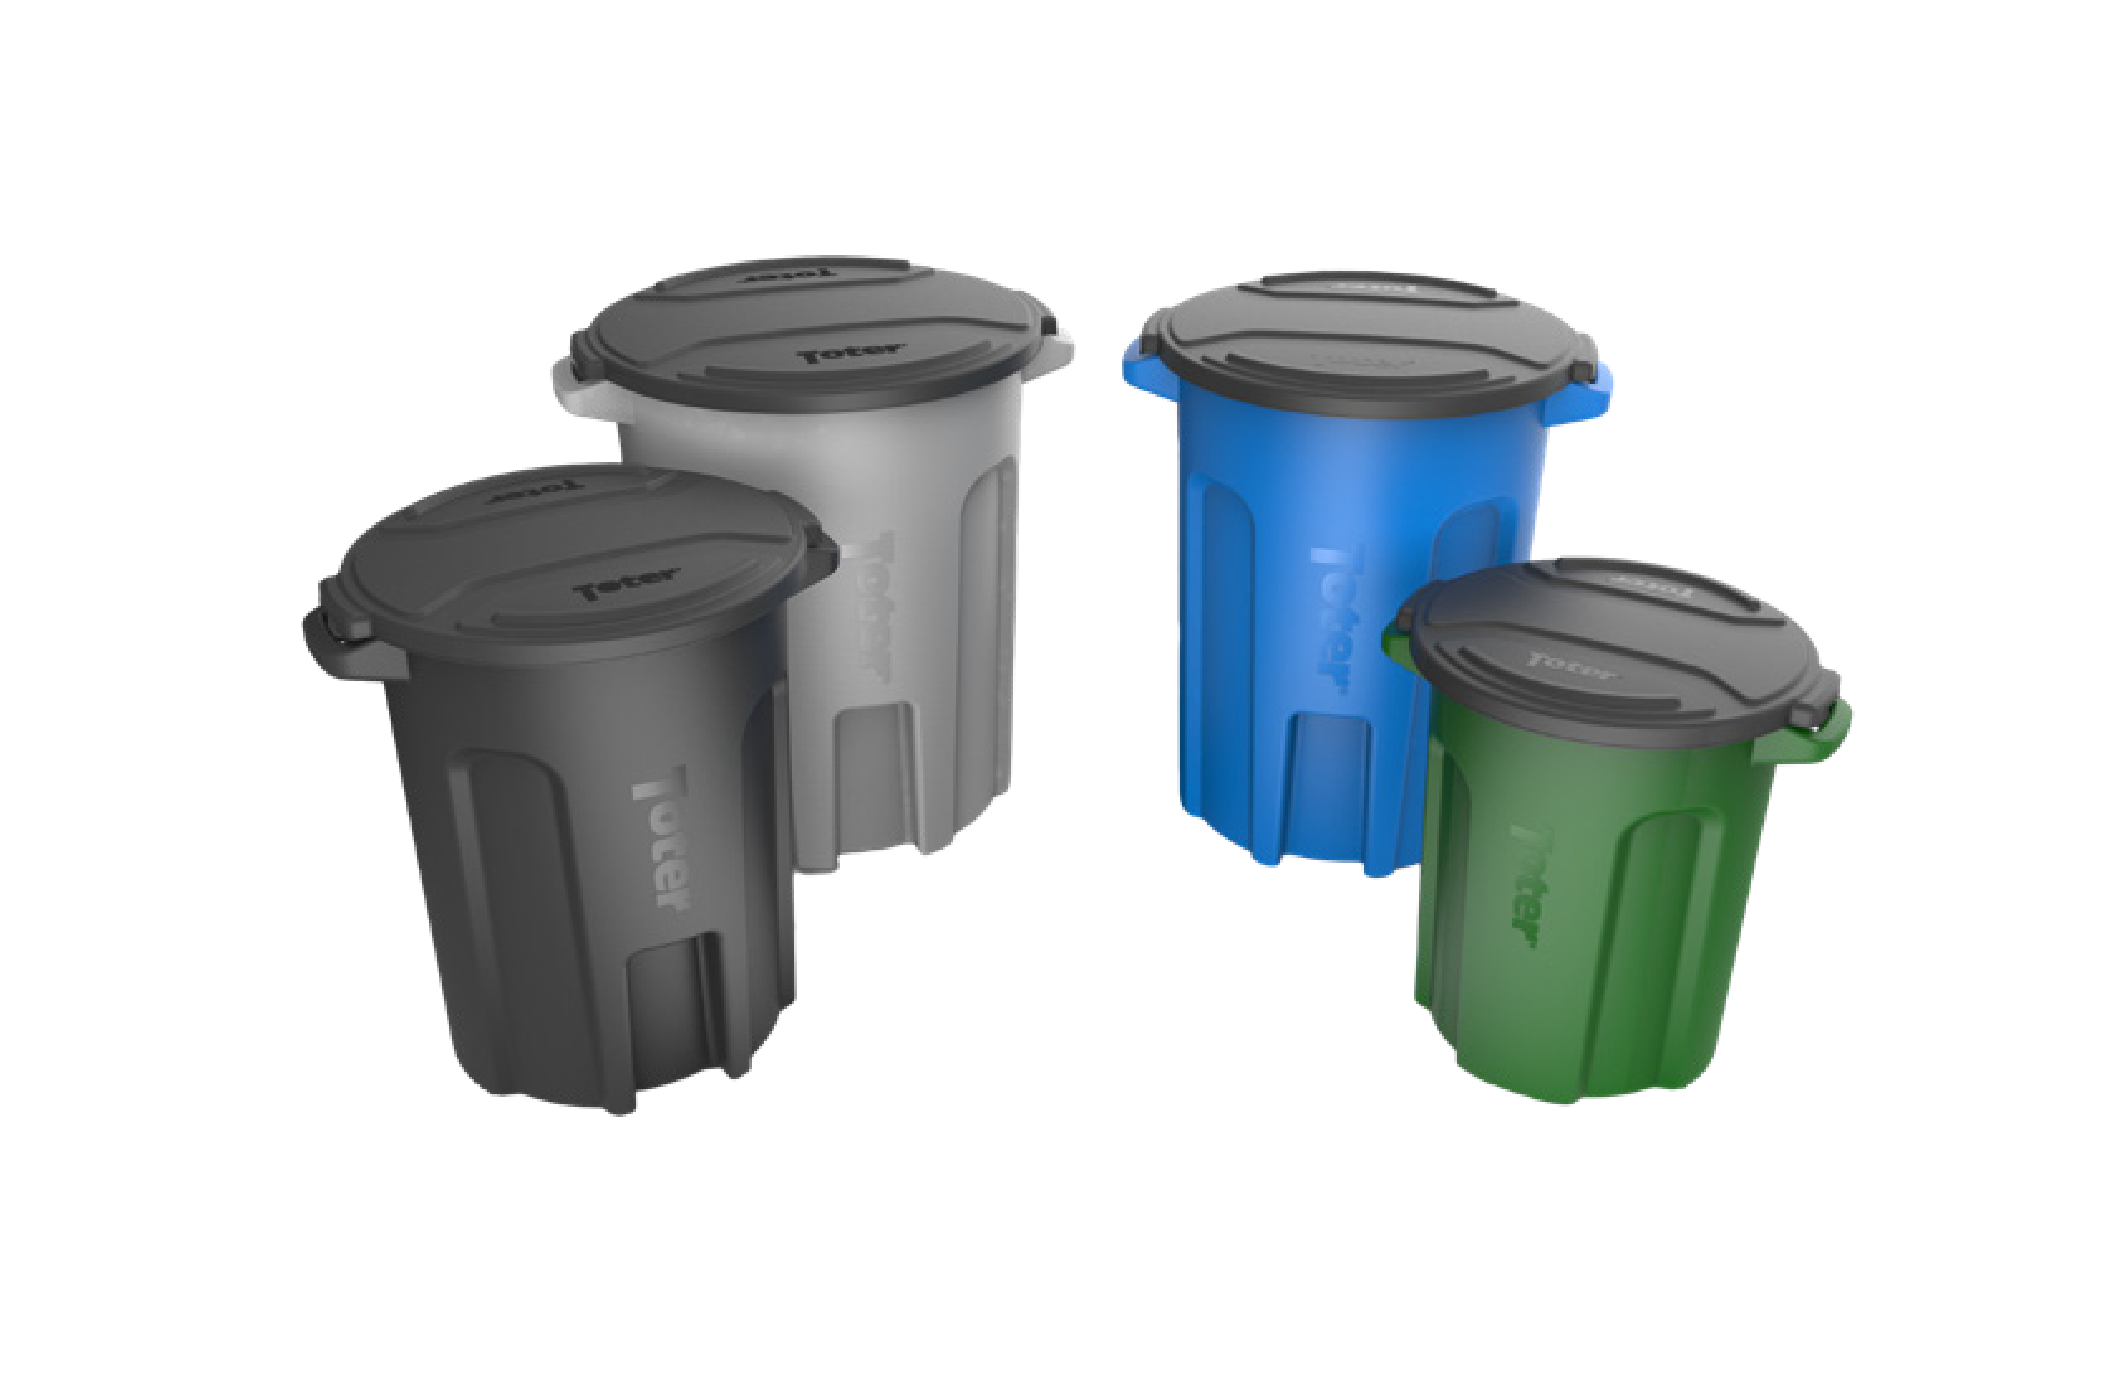 Round Trash Cans